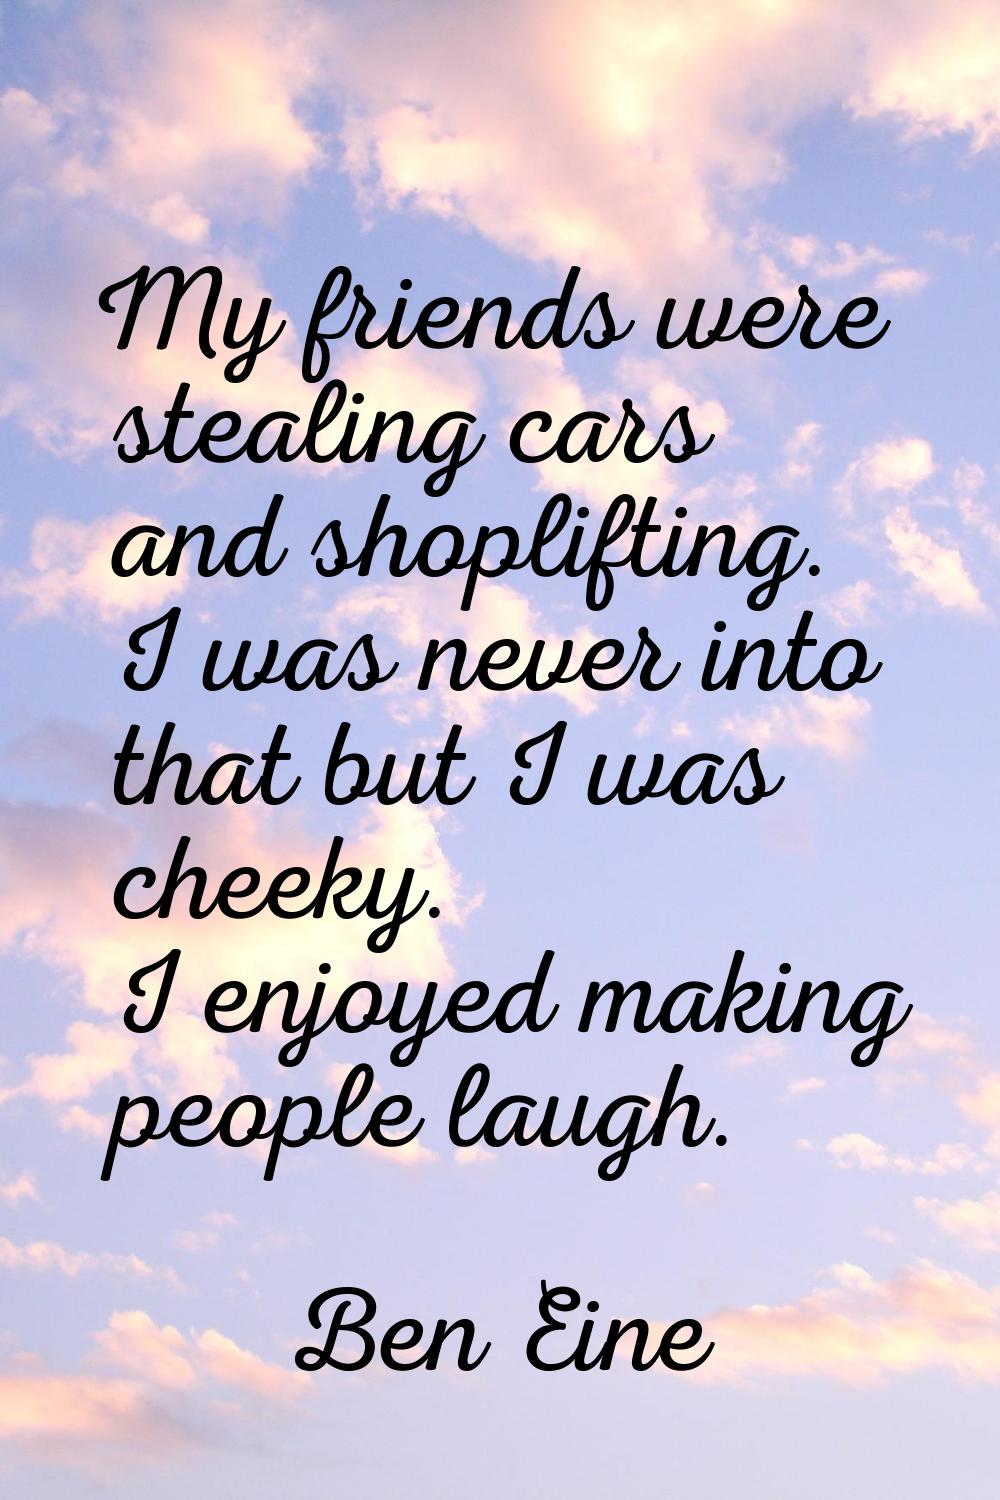 My friends were stealing cars and shoplifting. I was never into that but I was cheeky. I enjoyed ma